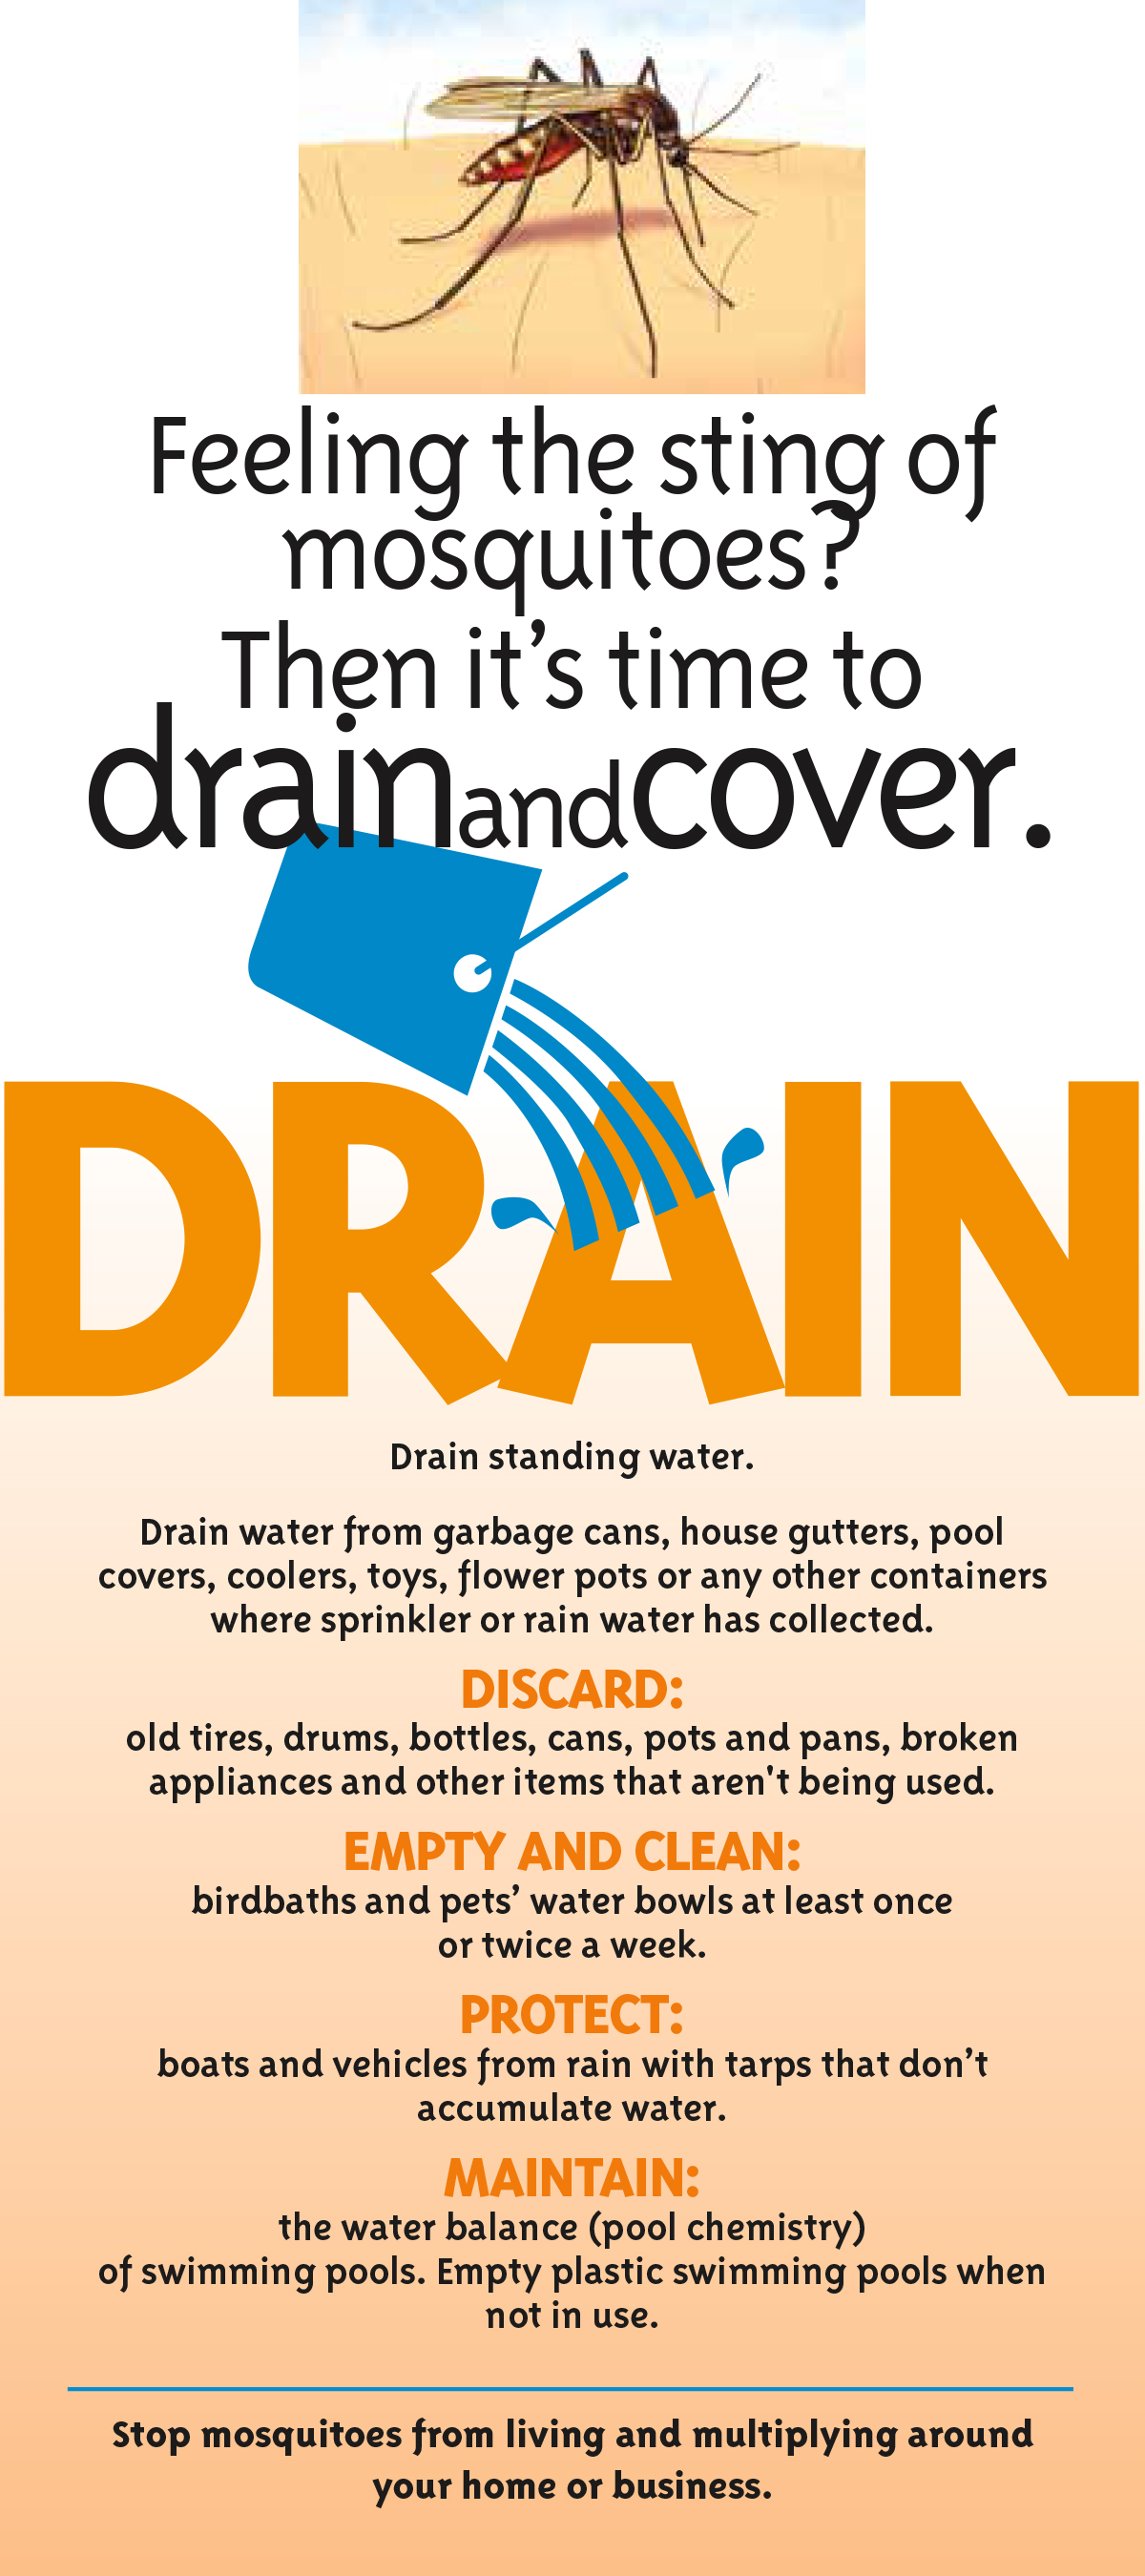 drain-and-cover-eng-1